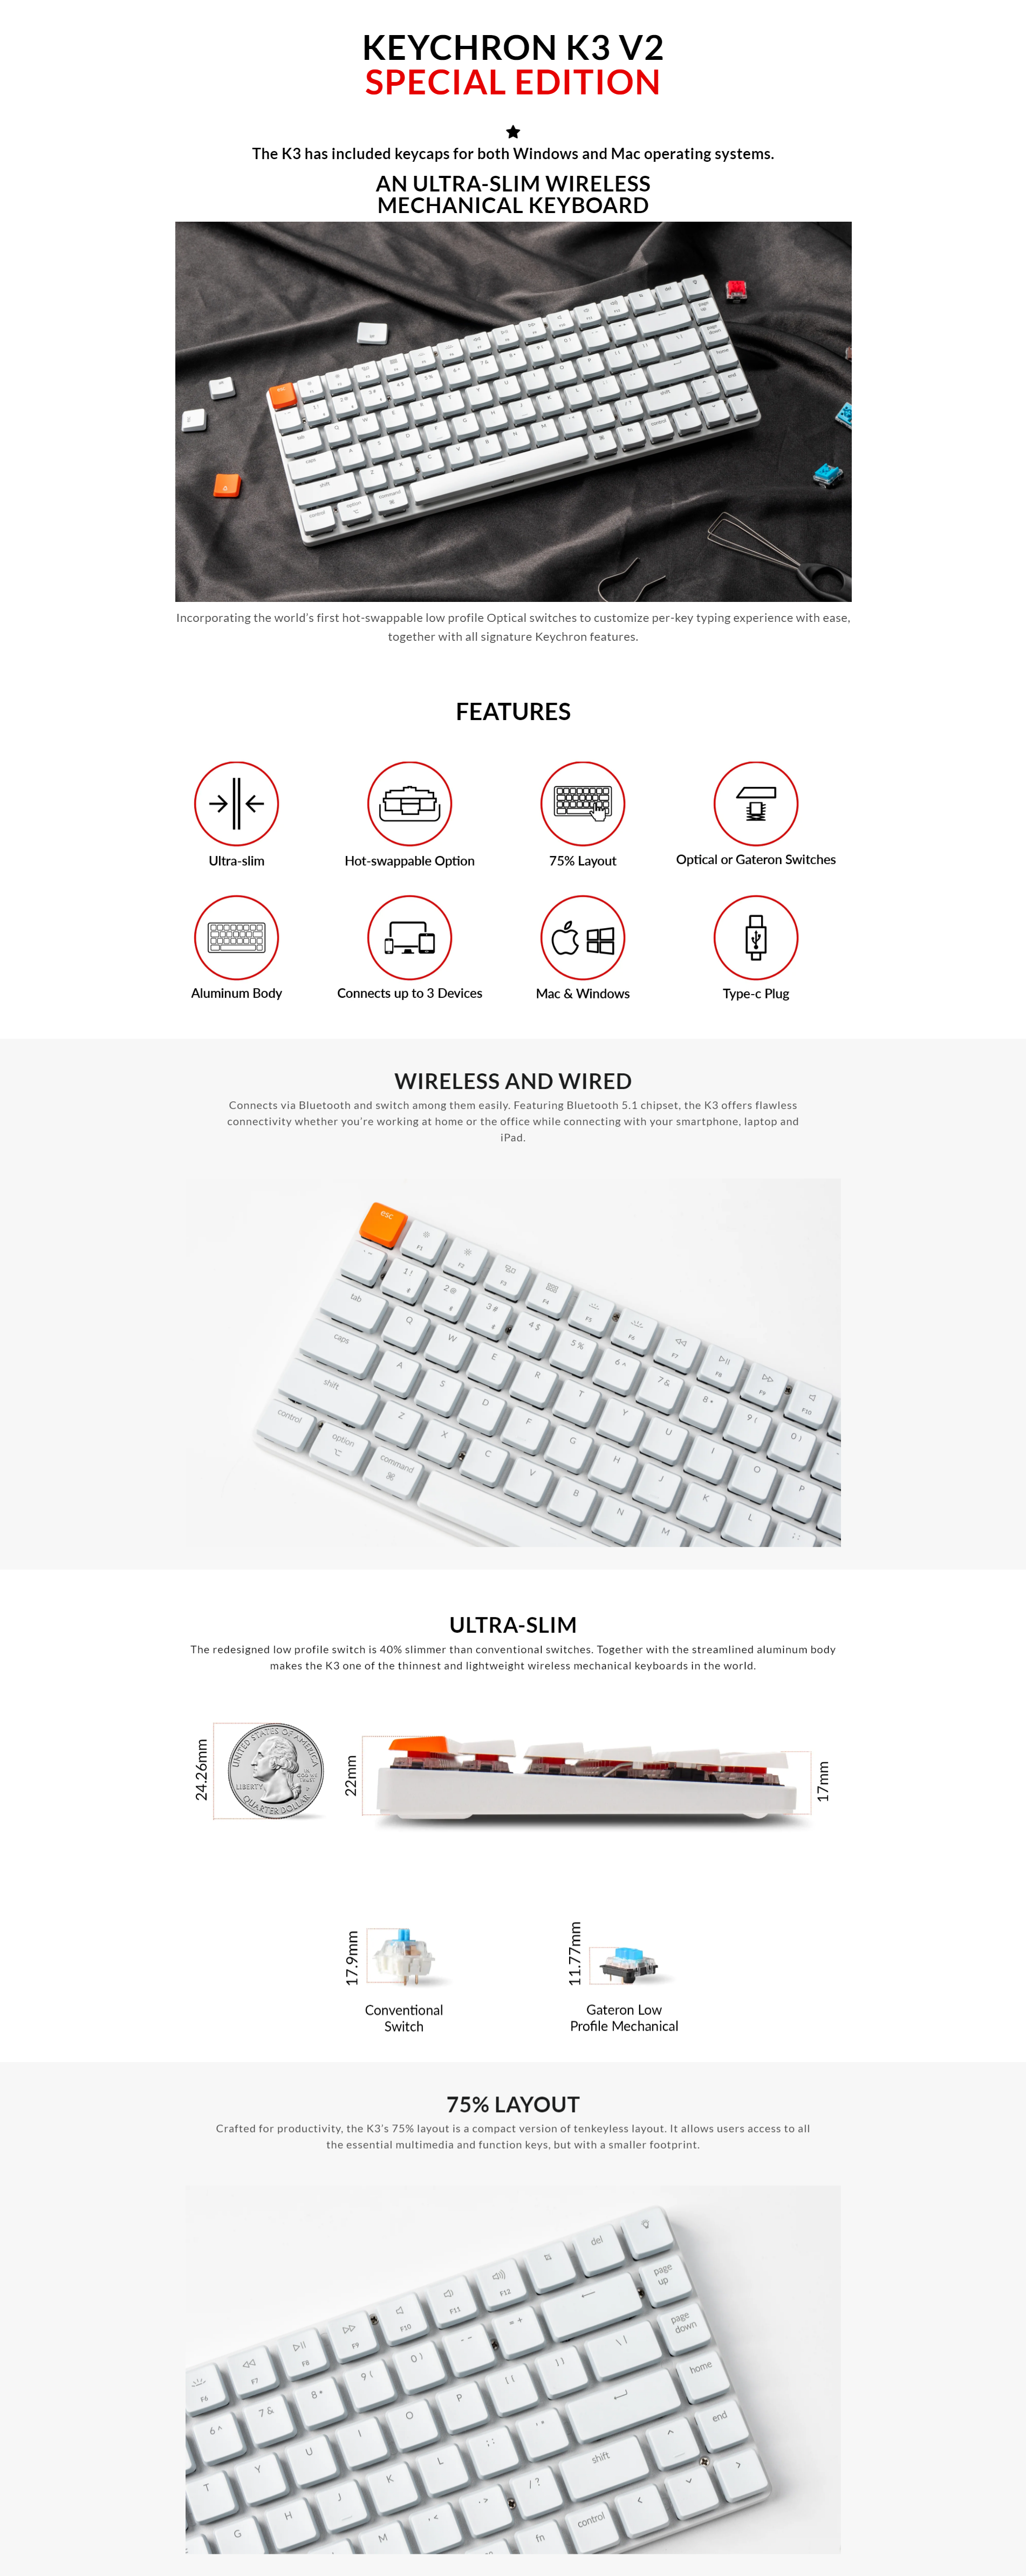 A large marketing image providing additional information about the product Keychron K3 V2 RGB Low Profile Hot-Swappable 75% Wireless Mechanical Keyboard - White (Red Switch) - Additional alt info not provided